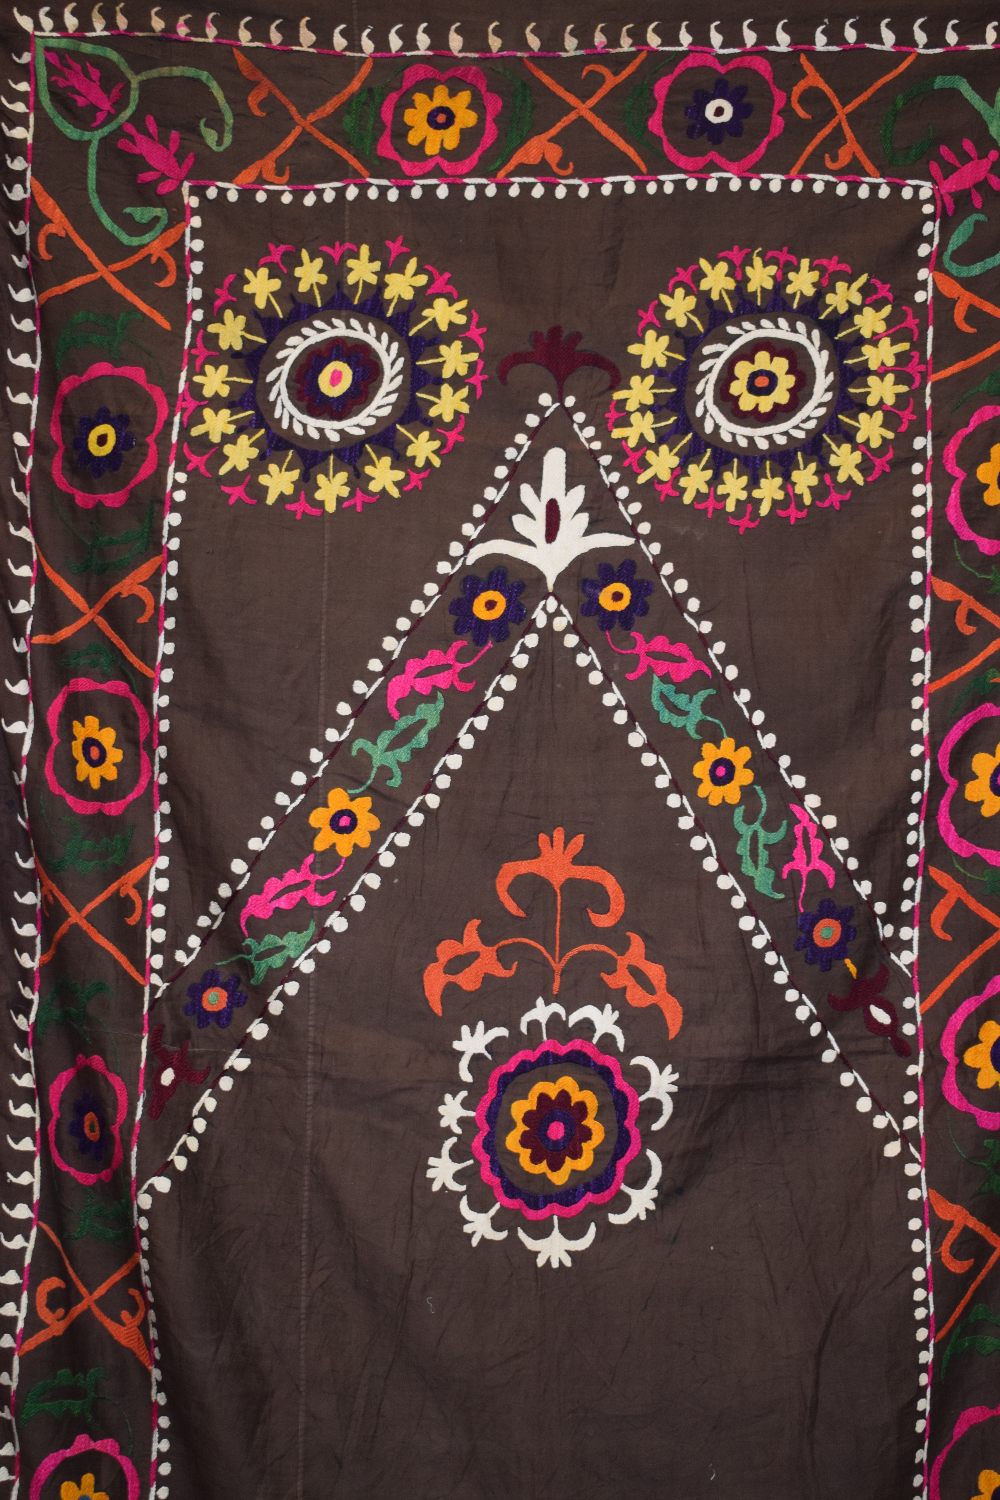 Uzbek suzani joinamoz (prayer cloth), Afghanistan, circa 1960s, 6ft. 3in. X 3ft. 5in. 1.91m. x 1. - Image 9 of 12